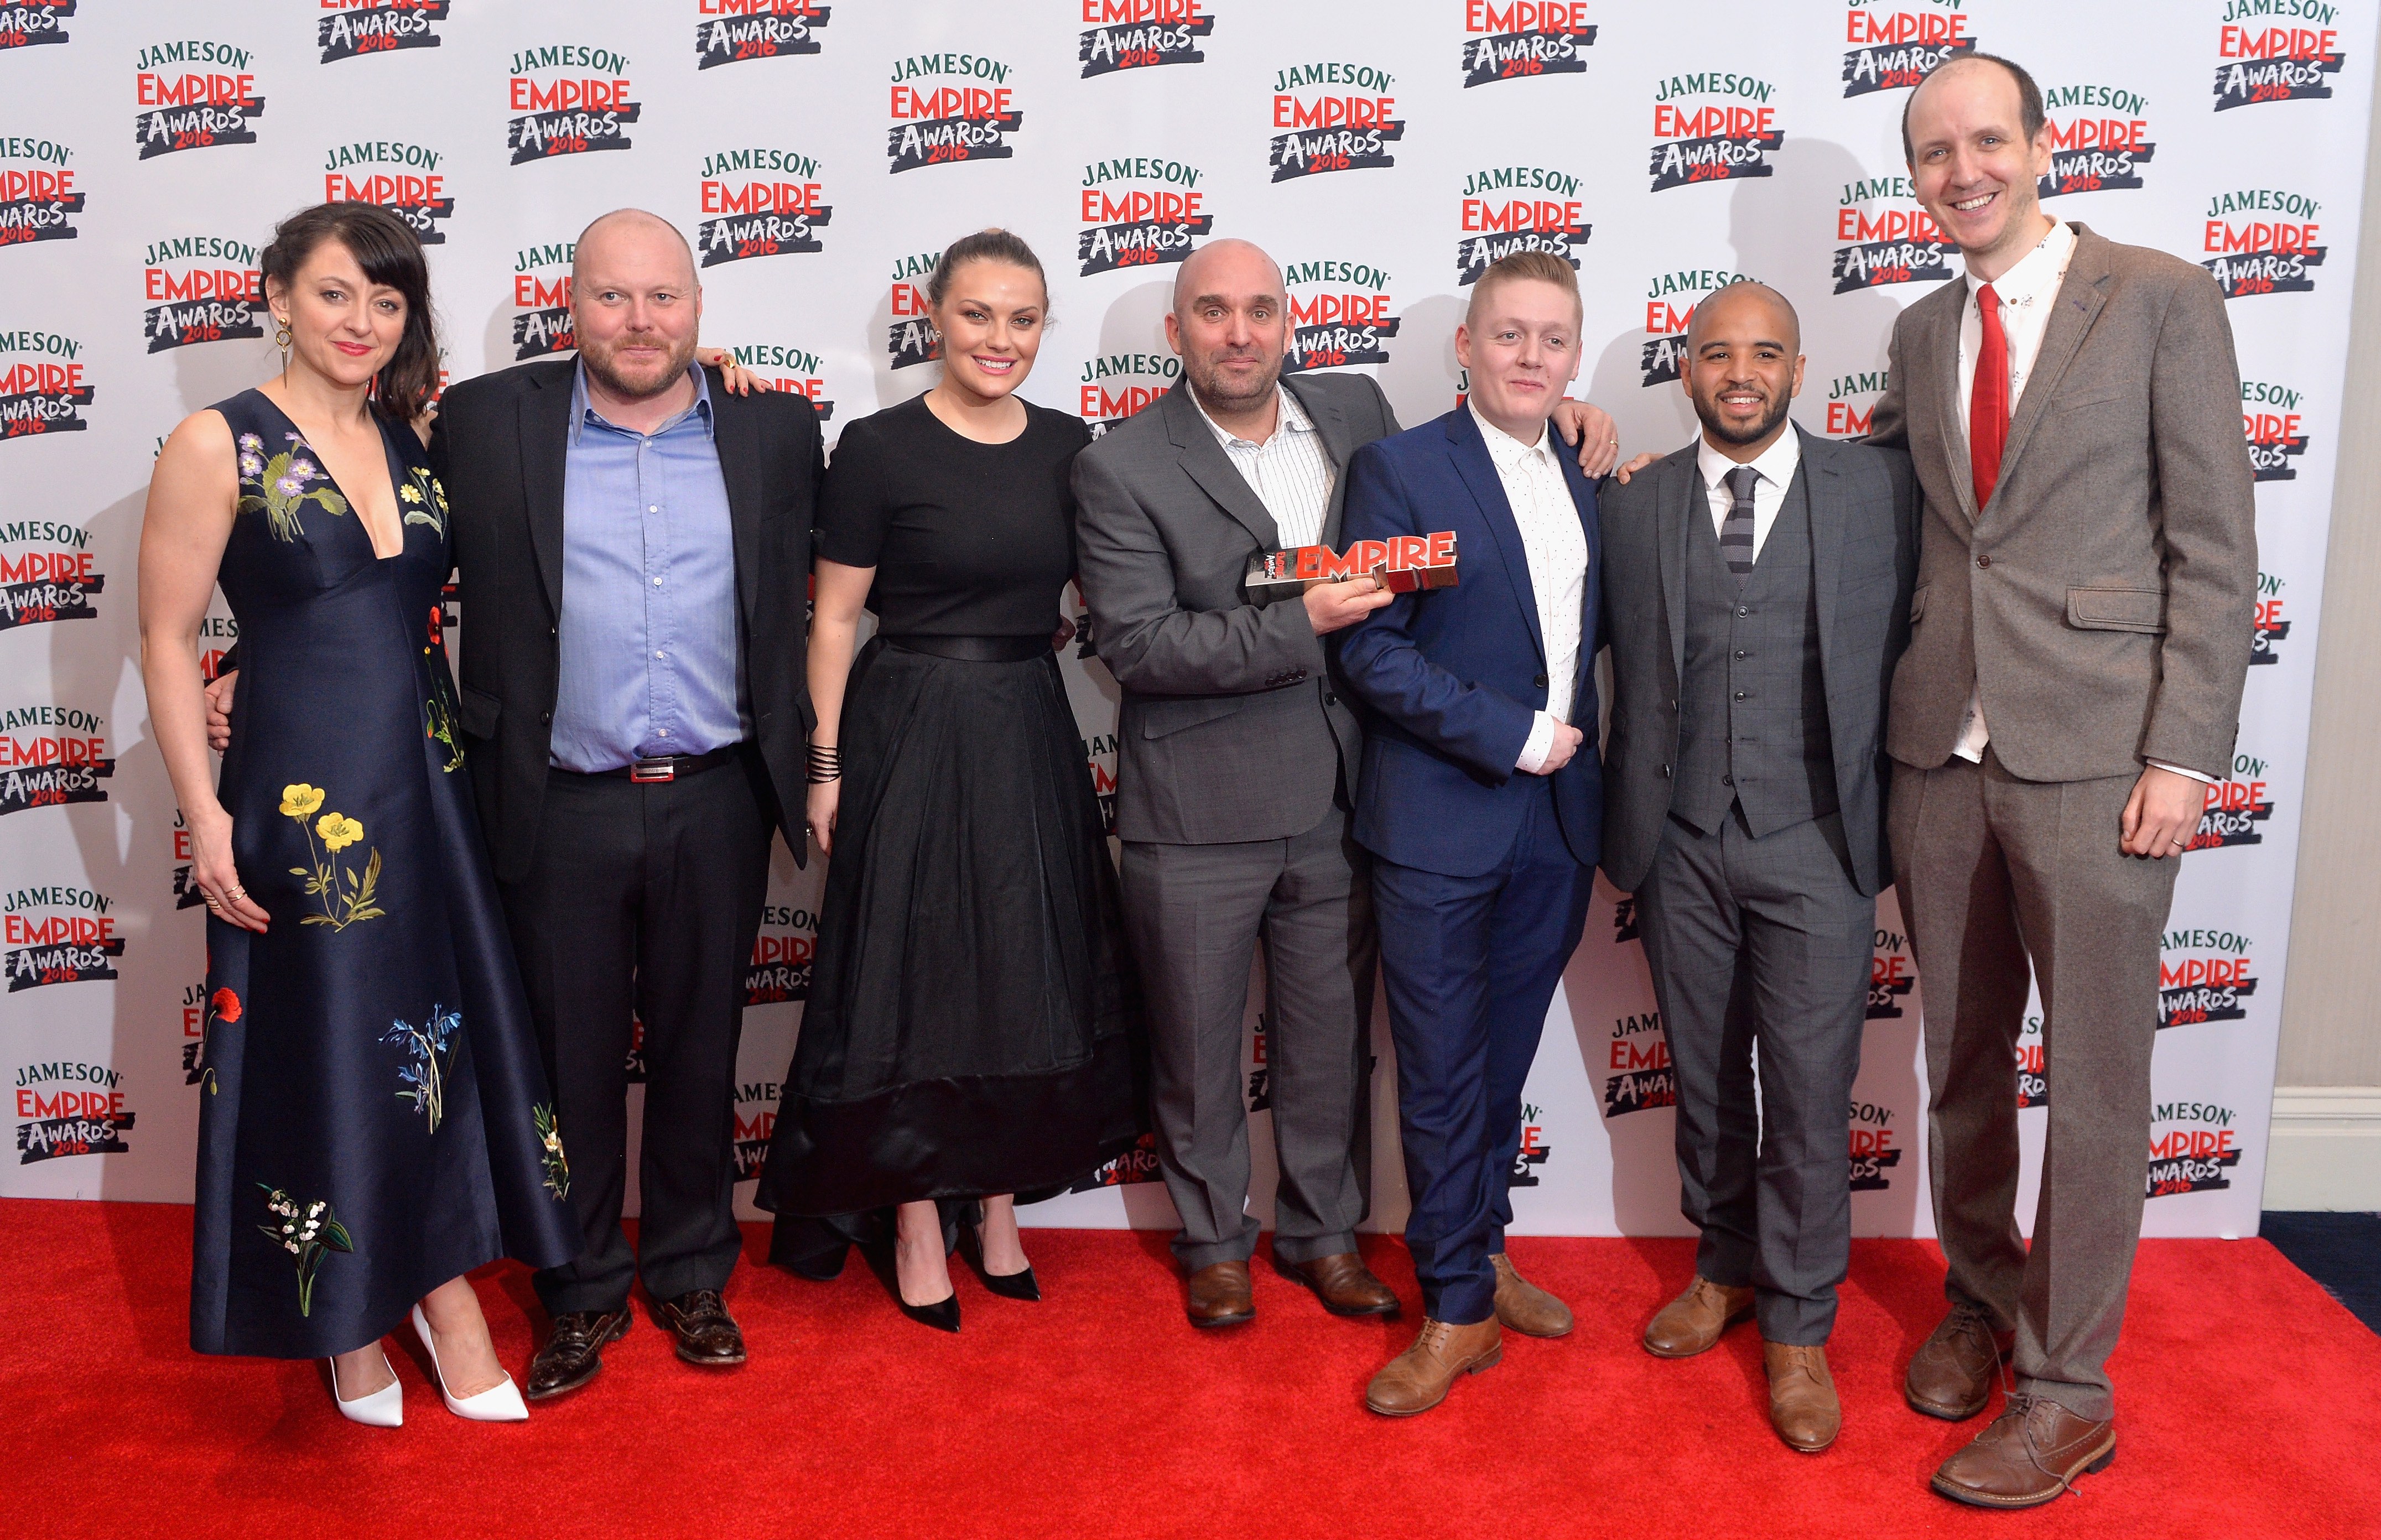 LONDON, ENGLAND - MARCH 20: Cast of This Is England '90; Jo Hartley, Mark Herbert, Chanel Cresswell, Shane Meadows, Thomas Turgoose, Andrew Shim and guest pose in the winners room at the Jameson Empire Awards 2016 at The Grosvenor House Hotel on March 20, 2016 in London, England. (Photo by Anthony Harvey/Getty Images)